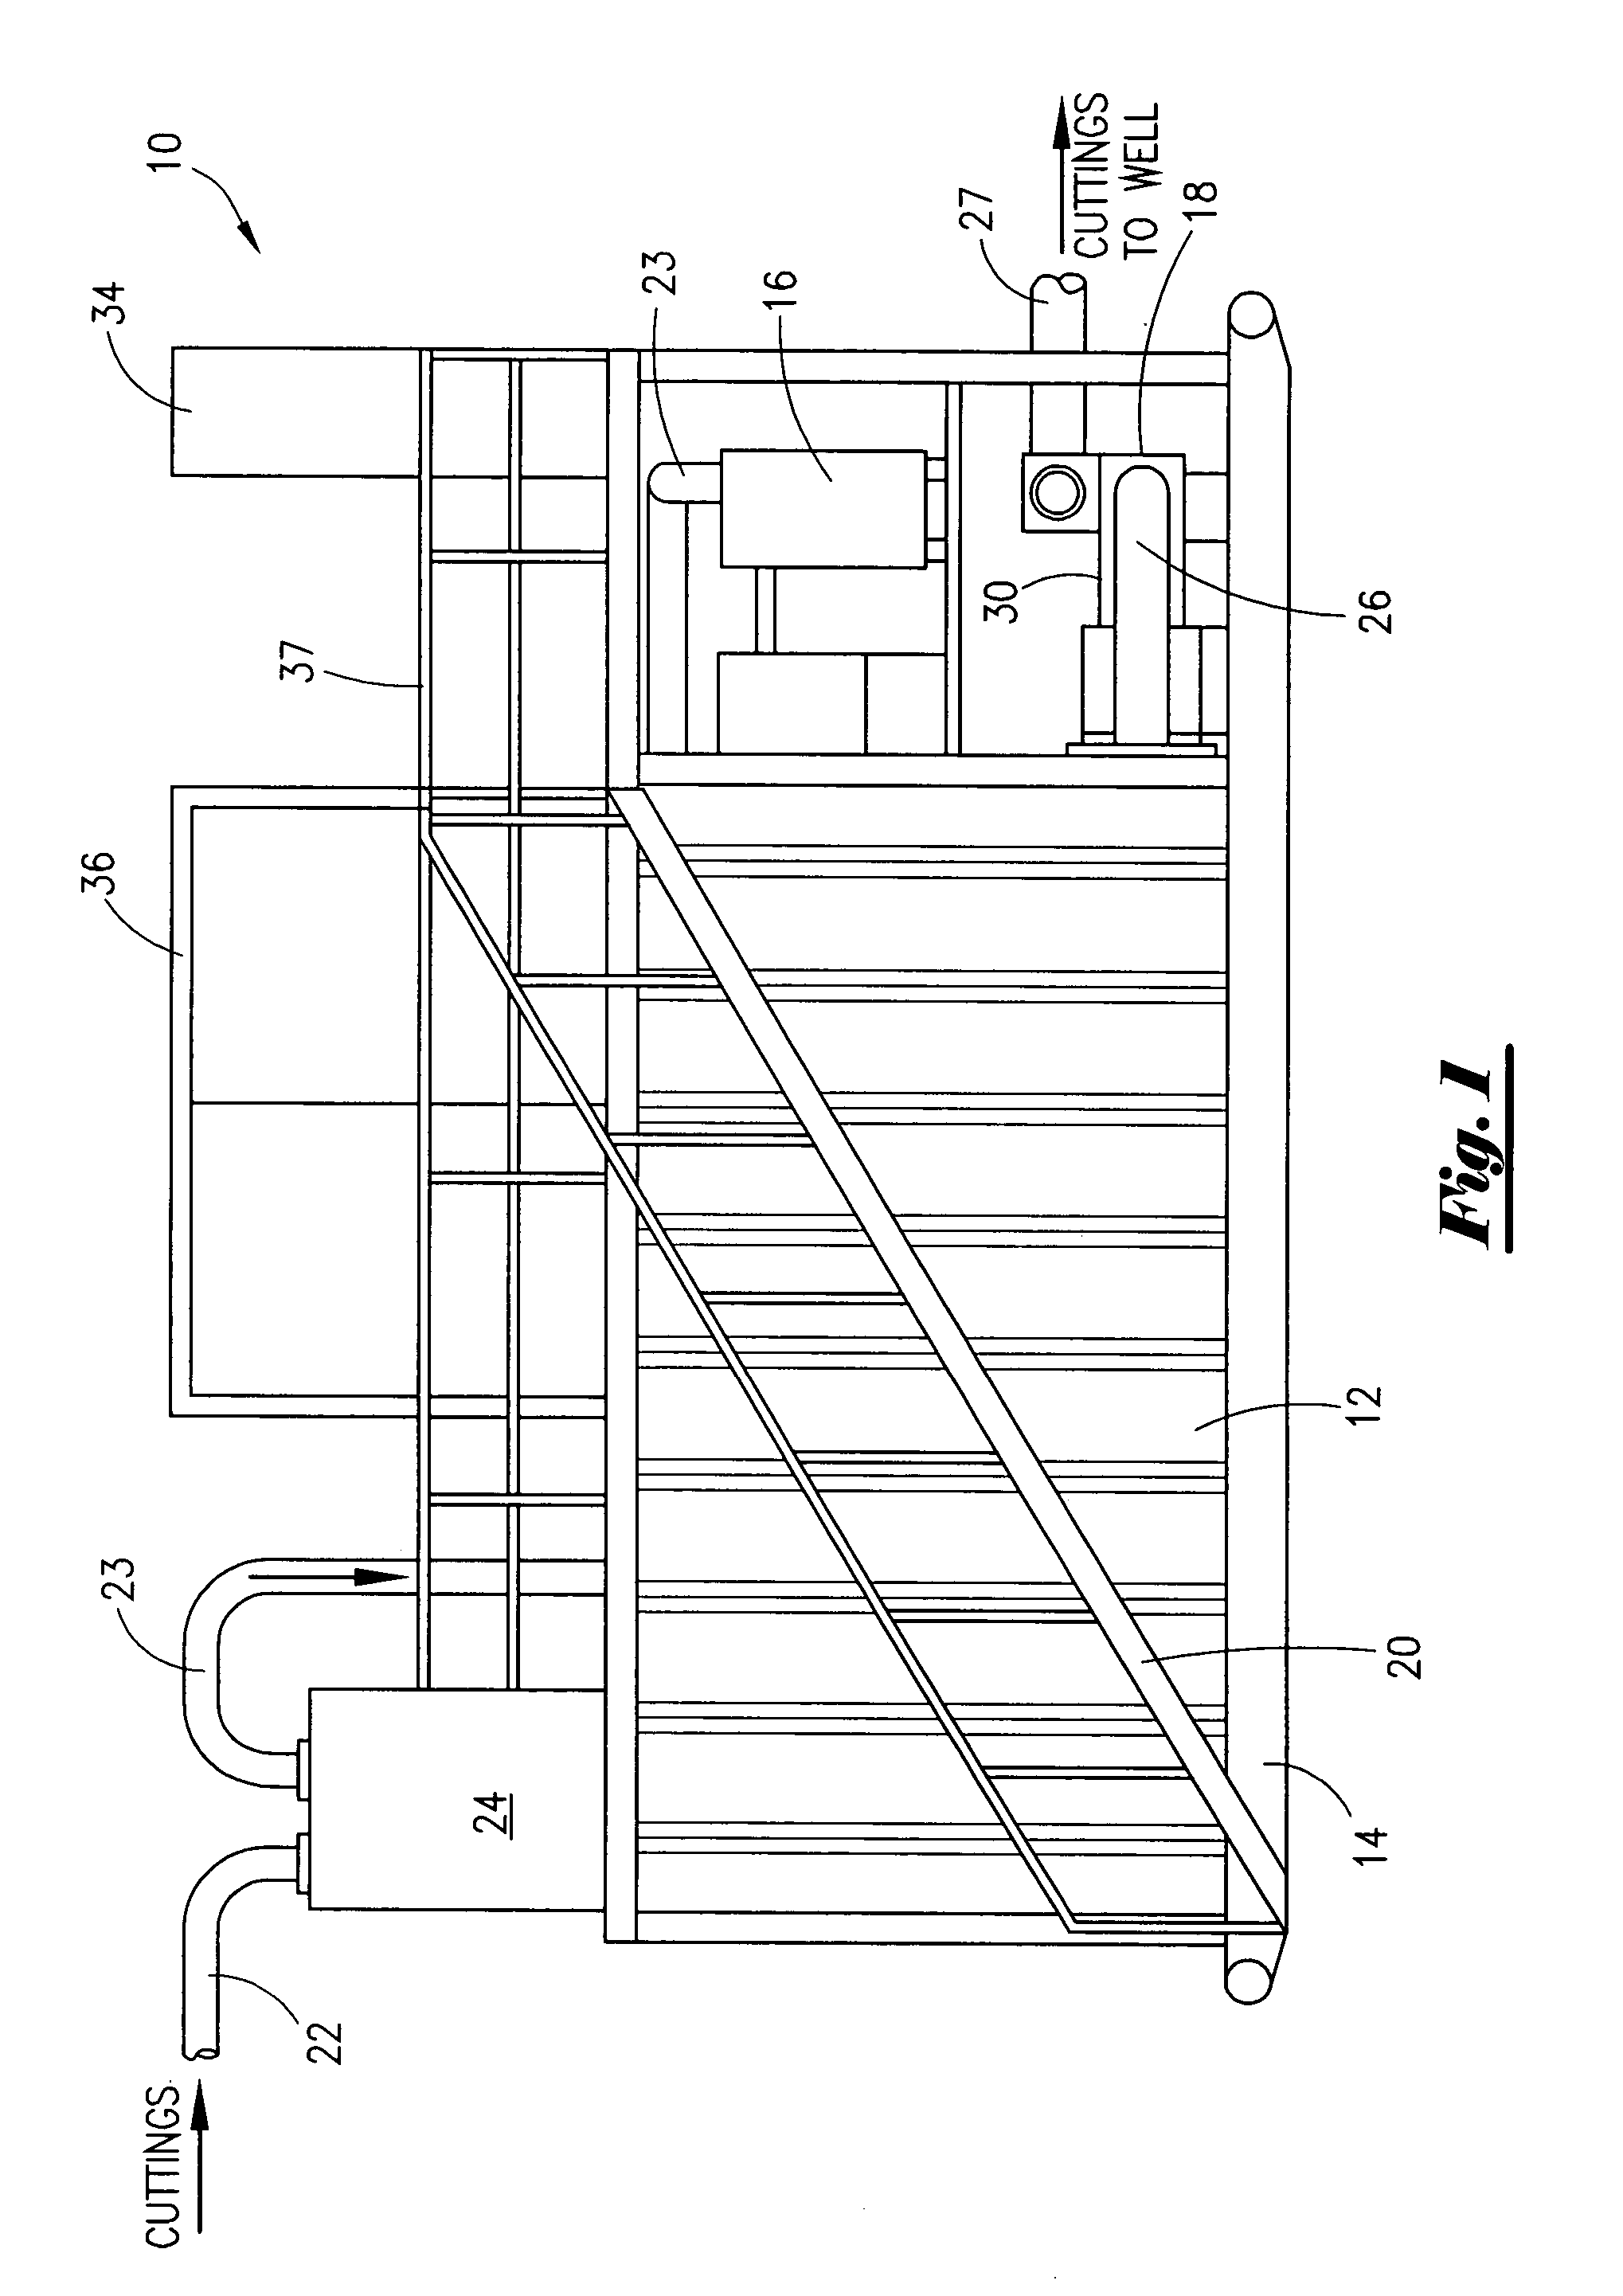 Method and apparatus for processing and injecting drill cuttings